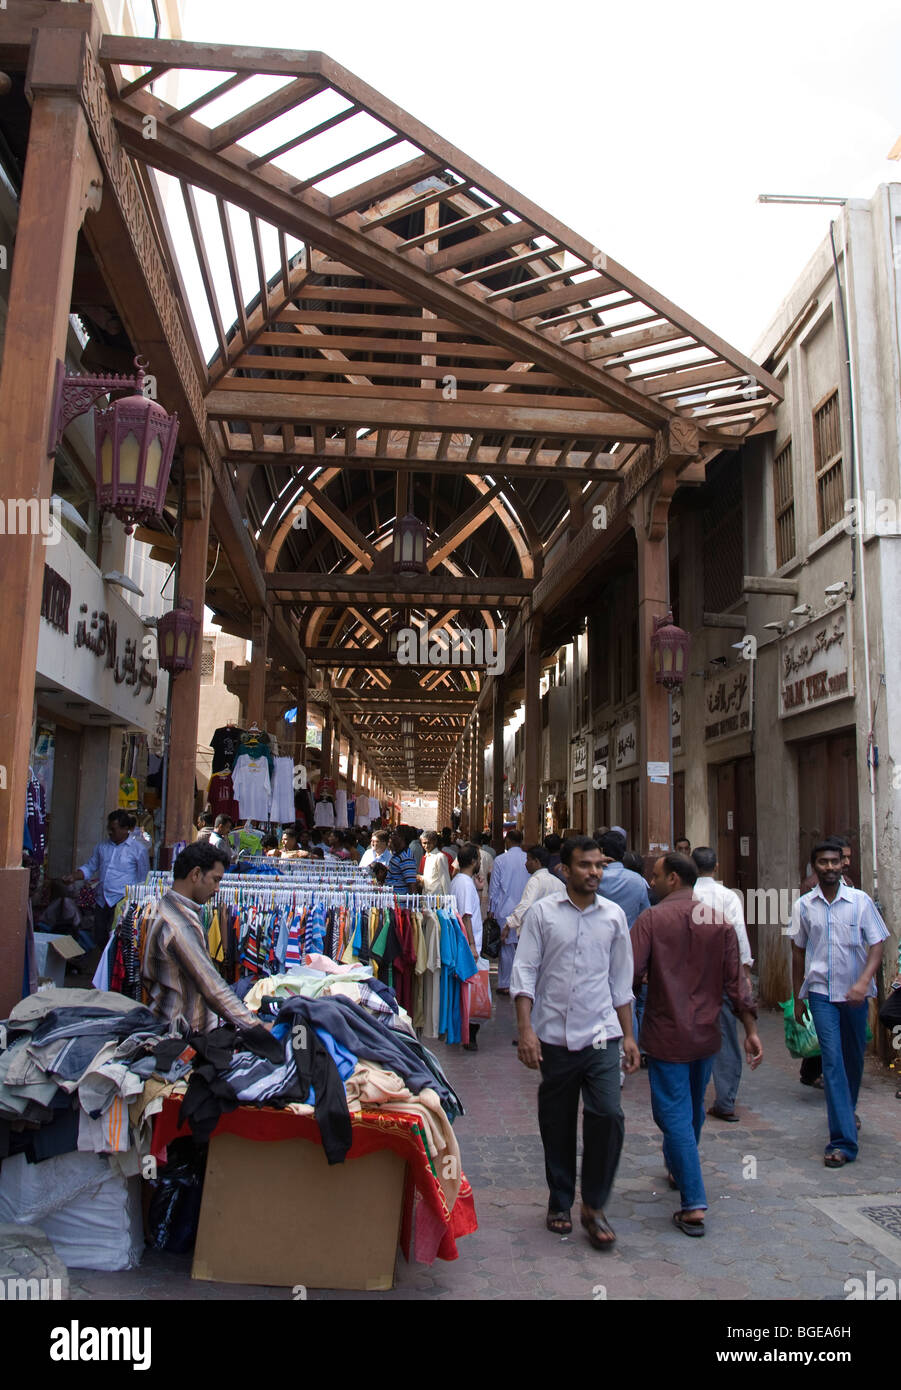 Dubai United Arab Emirates The weekly market in the Old Souk busy with shoppers Stock Photo